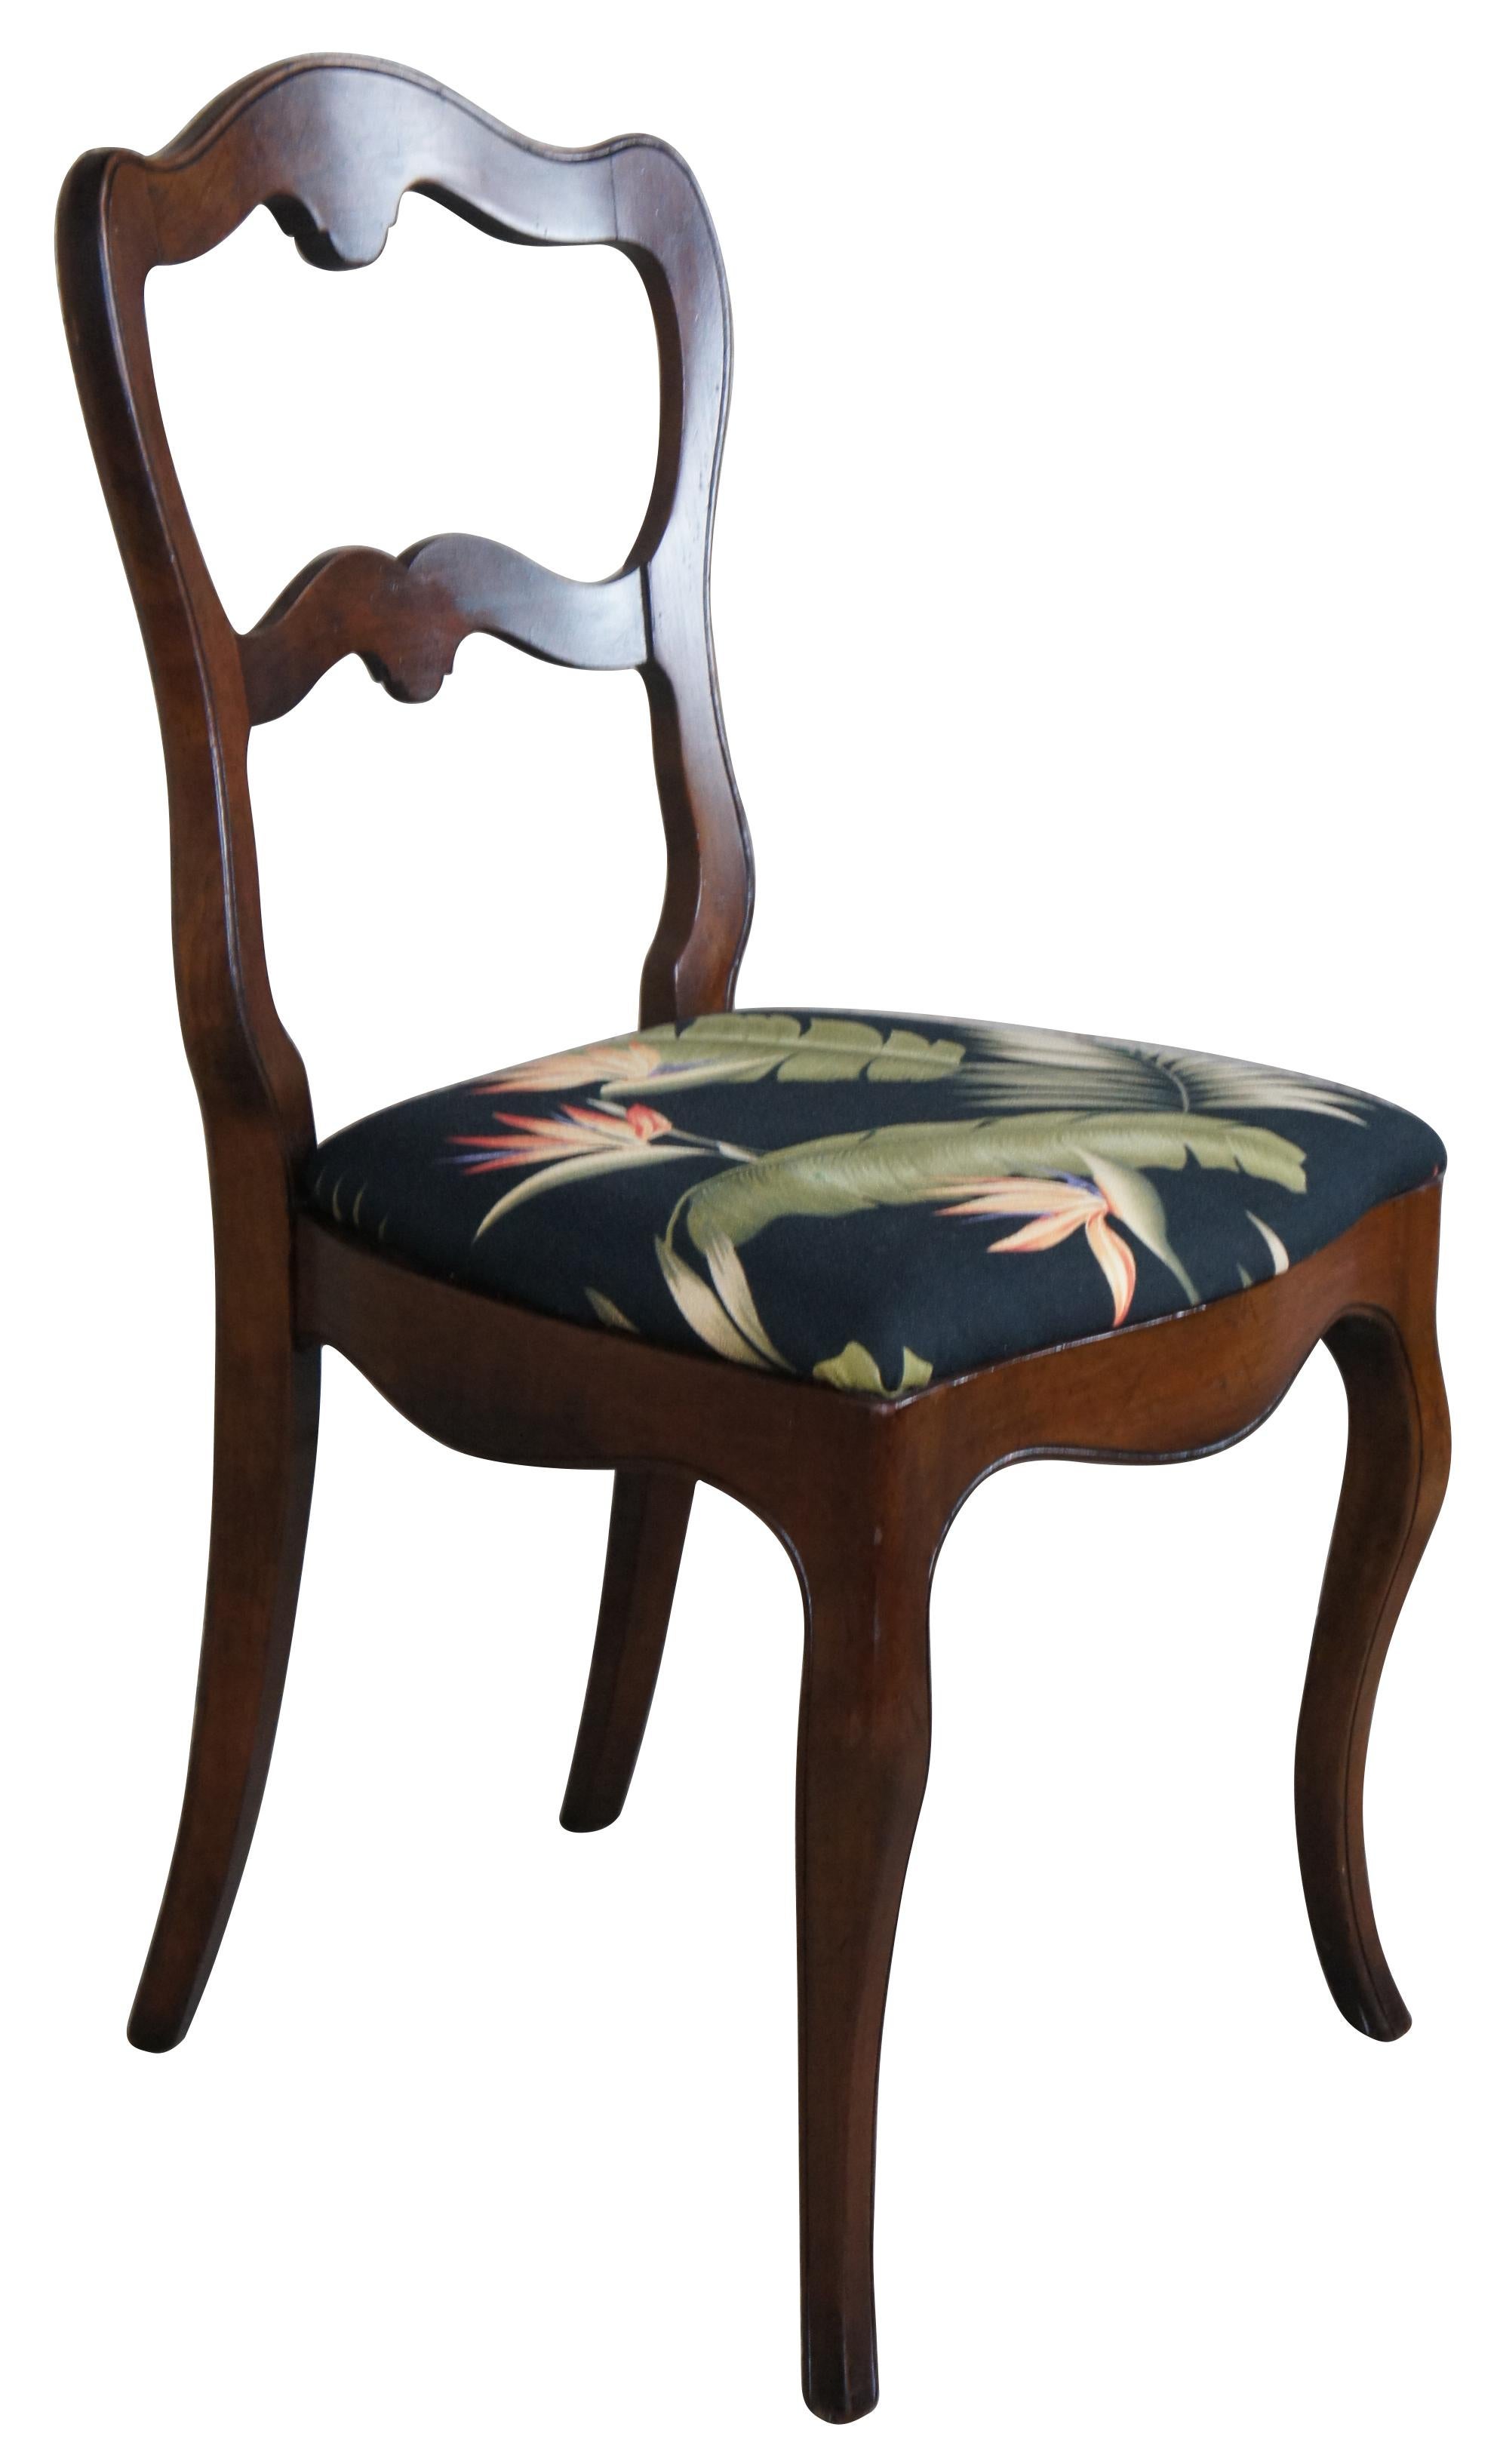 Set of 3 late 19th century dining or side chairs. Made from walnut with a serpentine back, tropical fabric and cabriole legs.